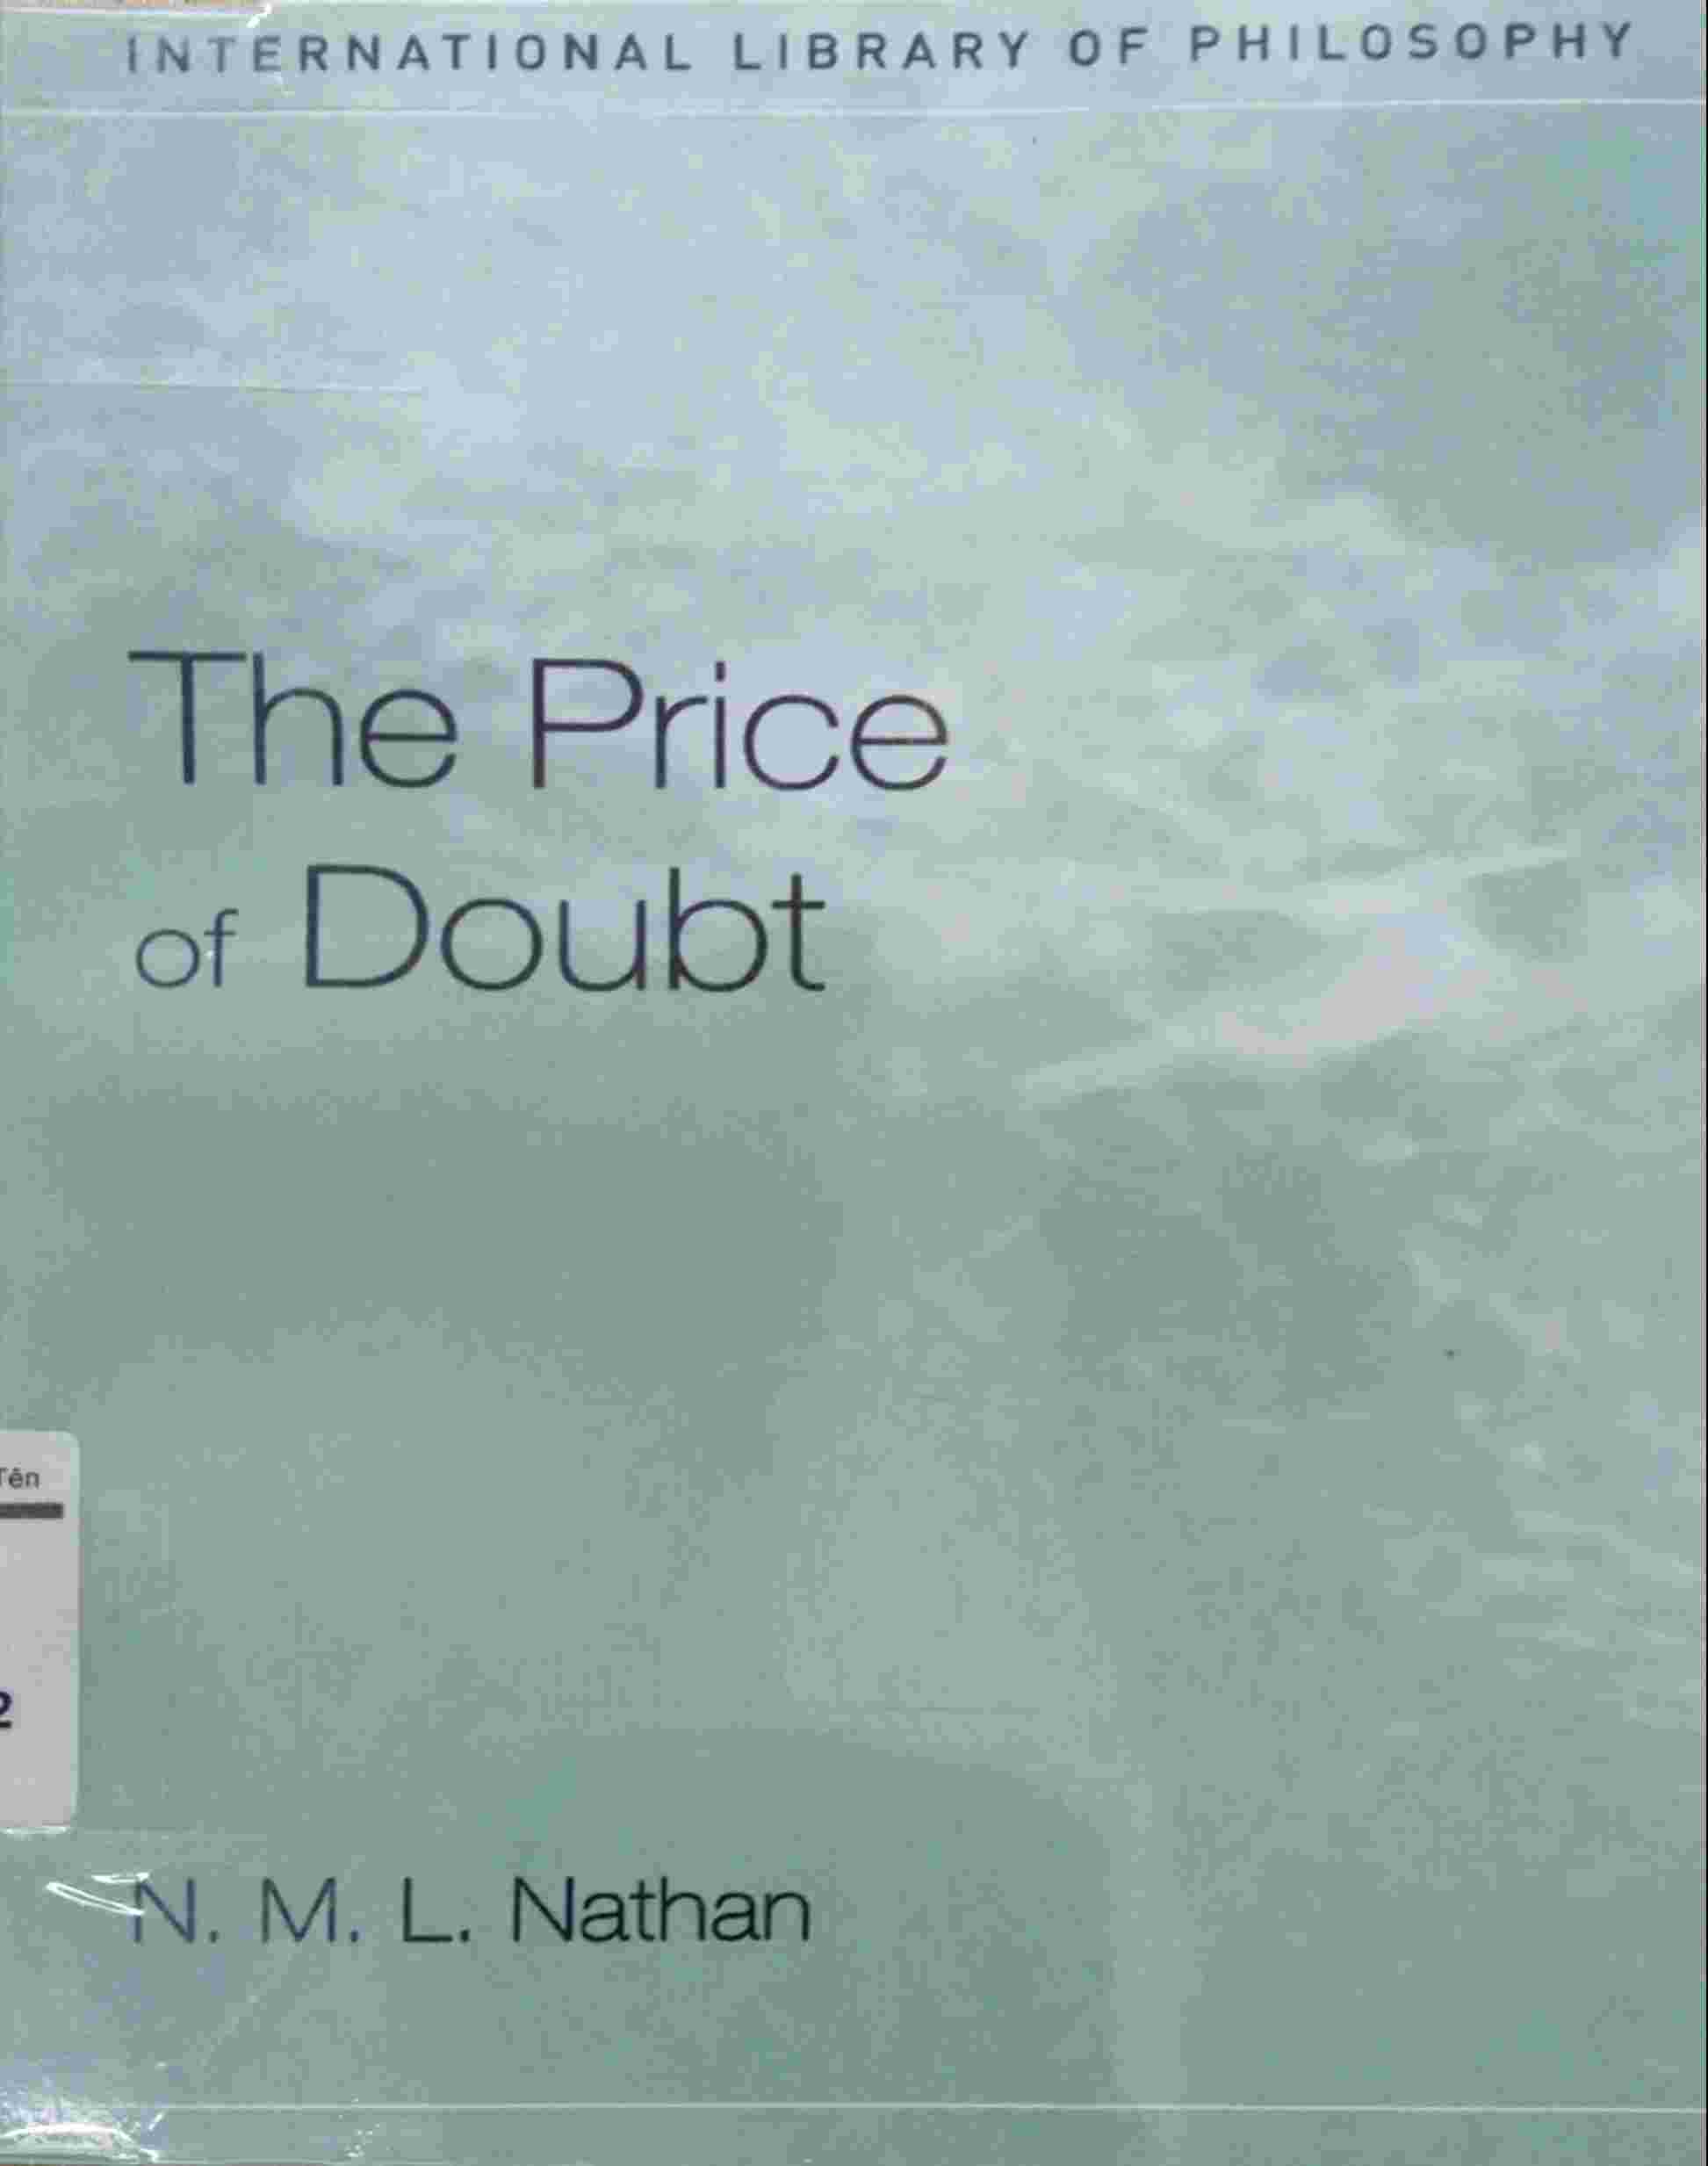 THE PRICE OF DOUBT